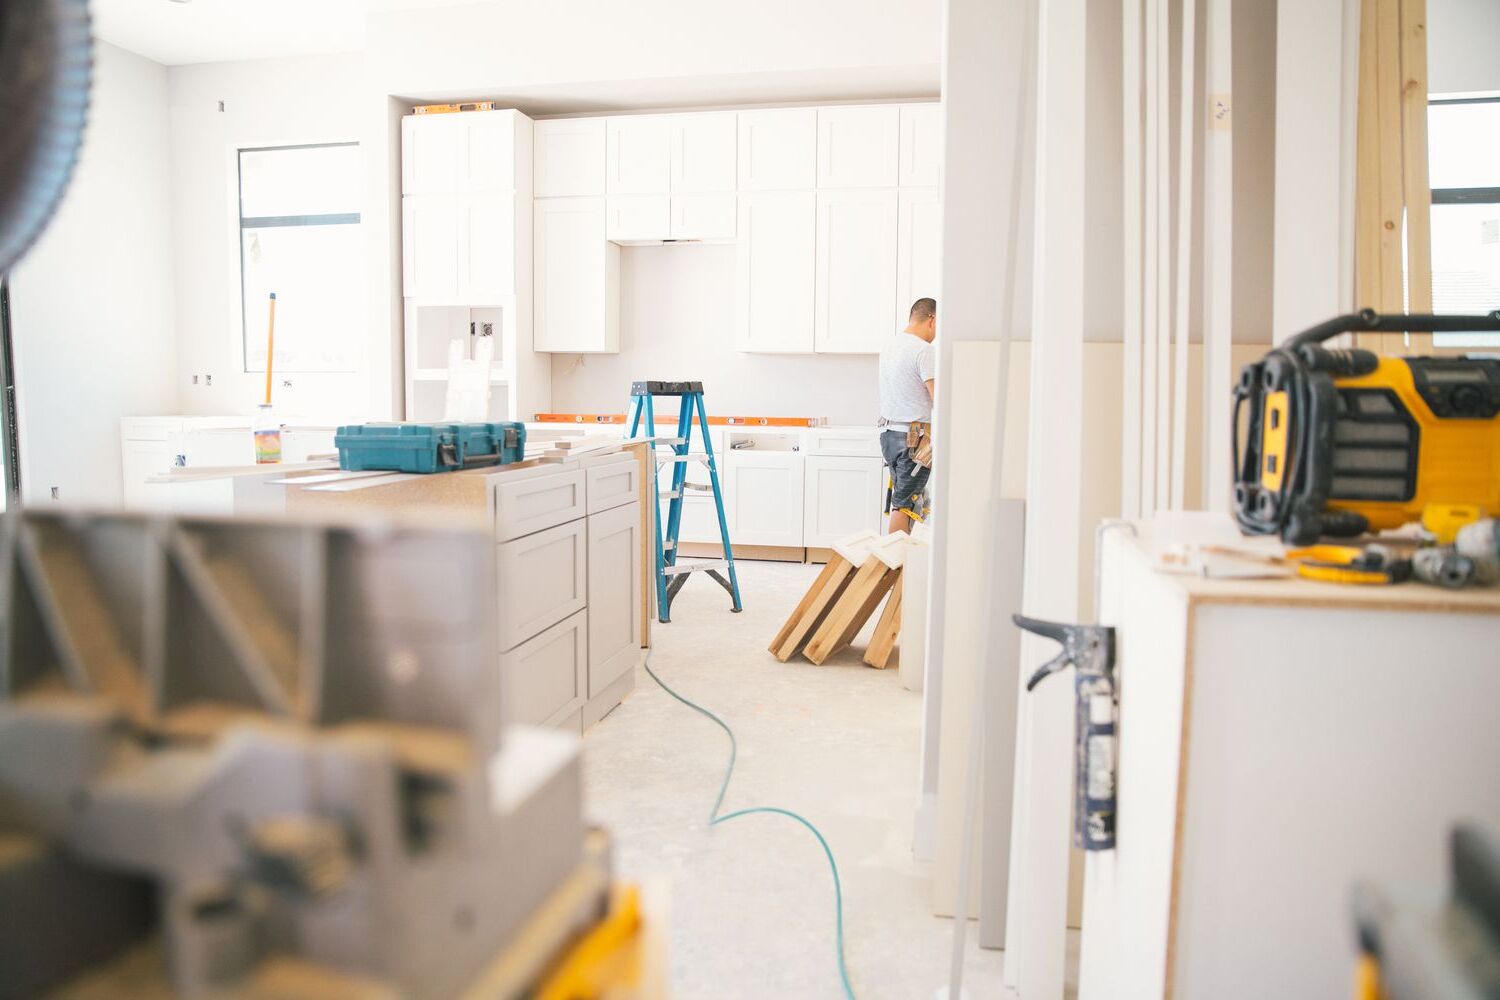 DIY vs Contractor: Which is Right for Your Kitchen Remodel?